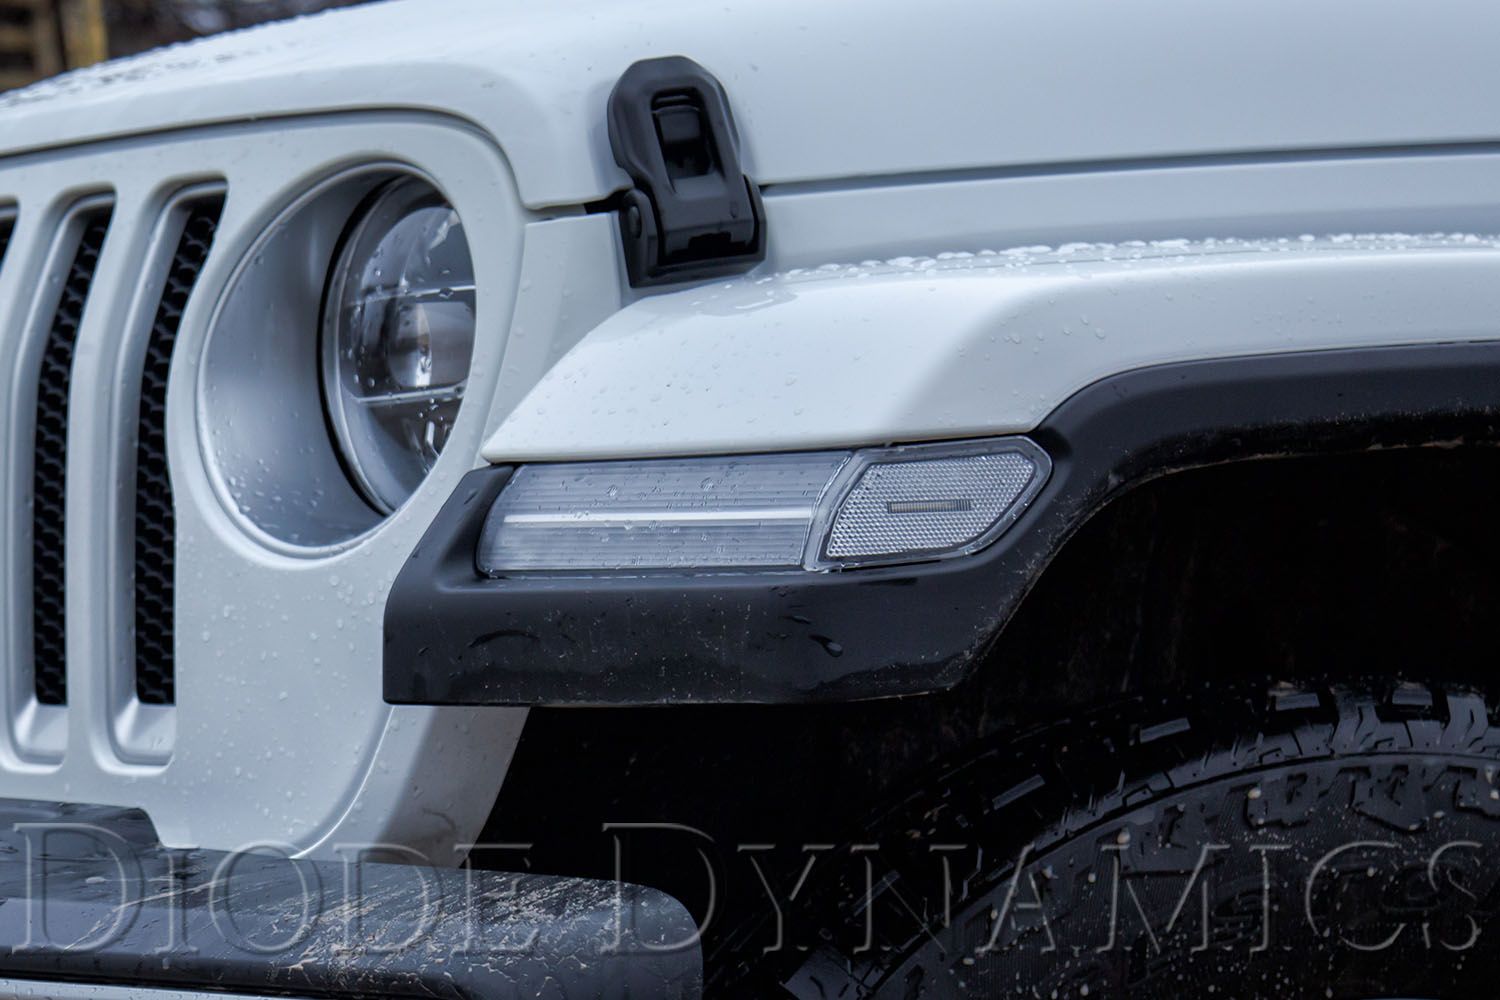 New! LED Sidemarkers for the  2018-2019 Jeep JL Wrangler!